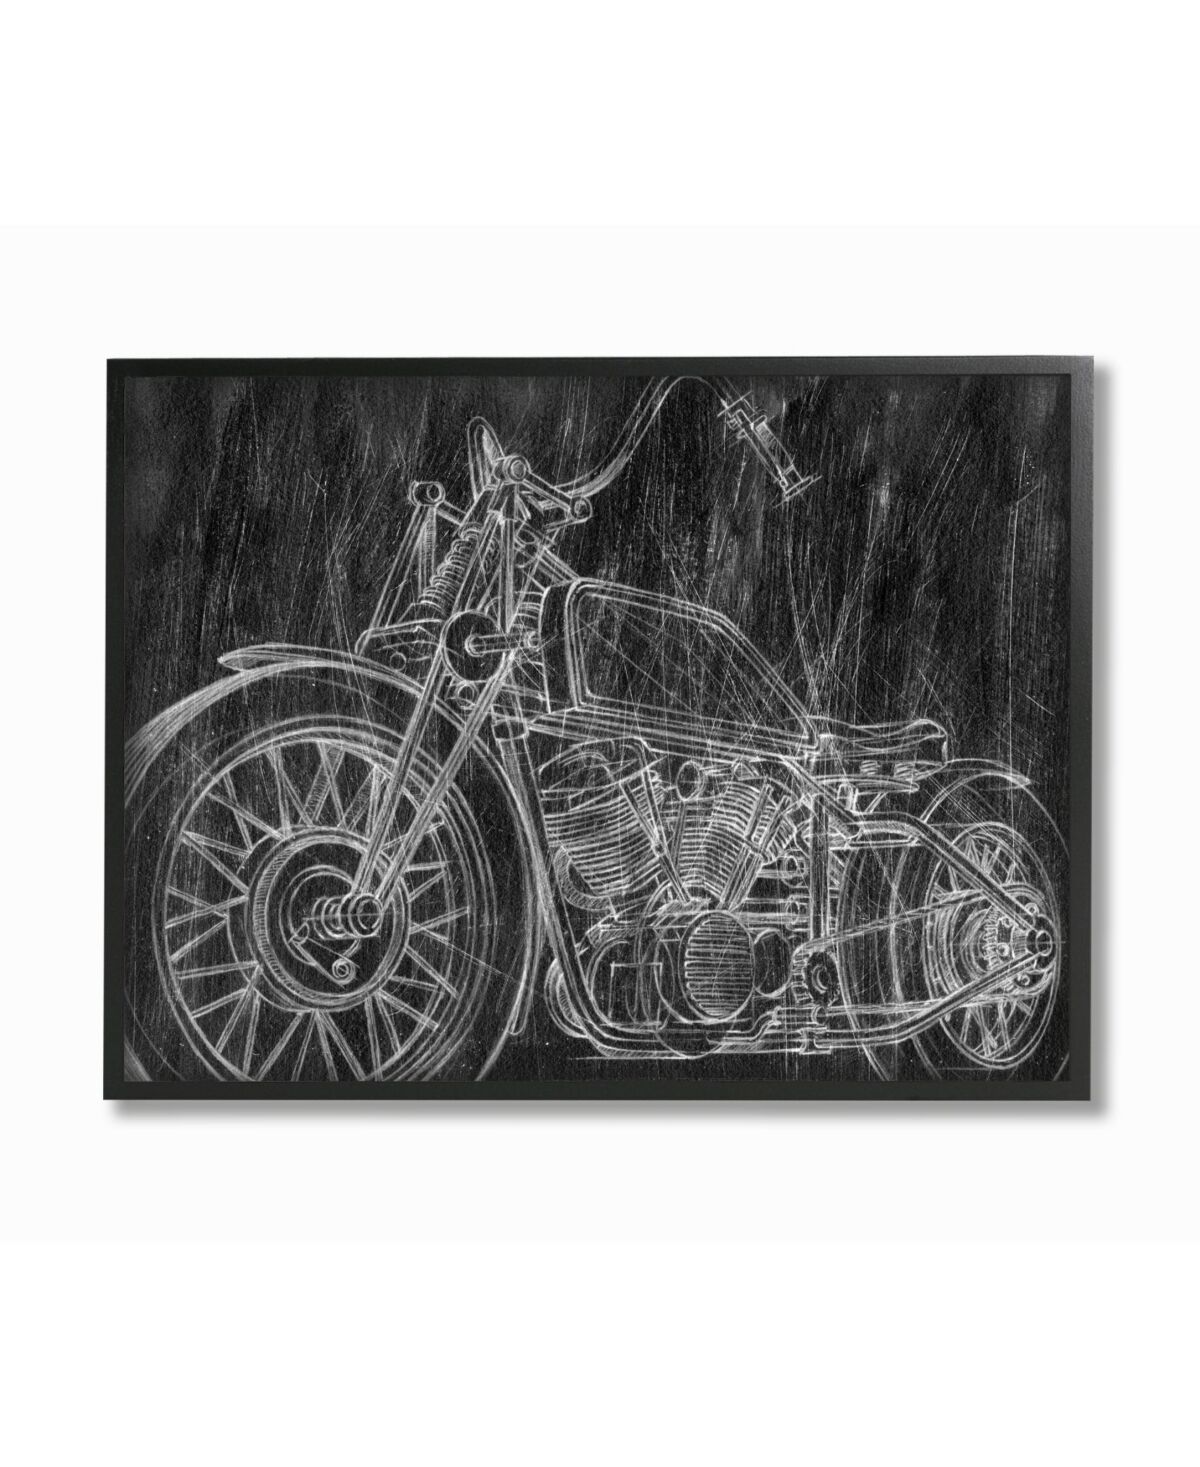 Stupell Industries Monotone Black and White Motorcycle Sketch Framed Texturized Art, 24